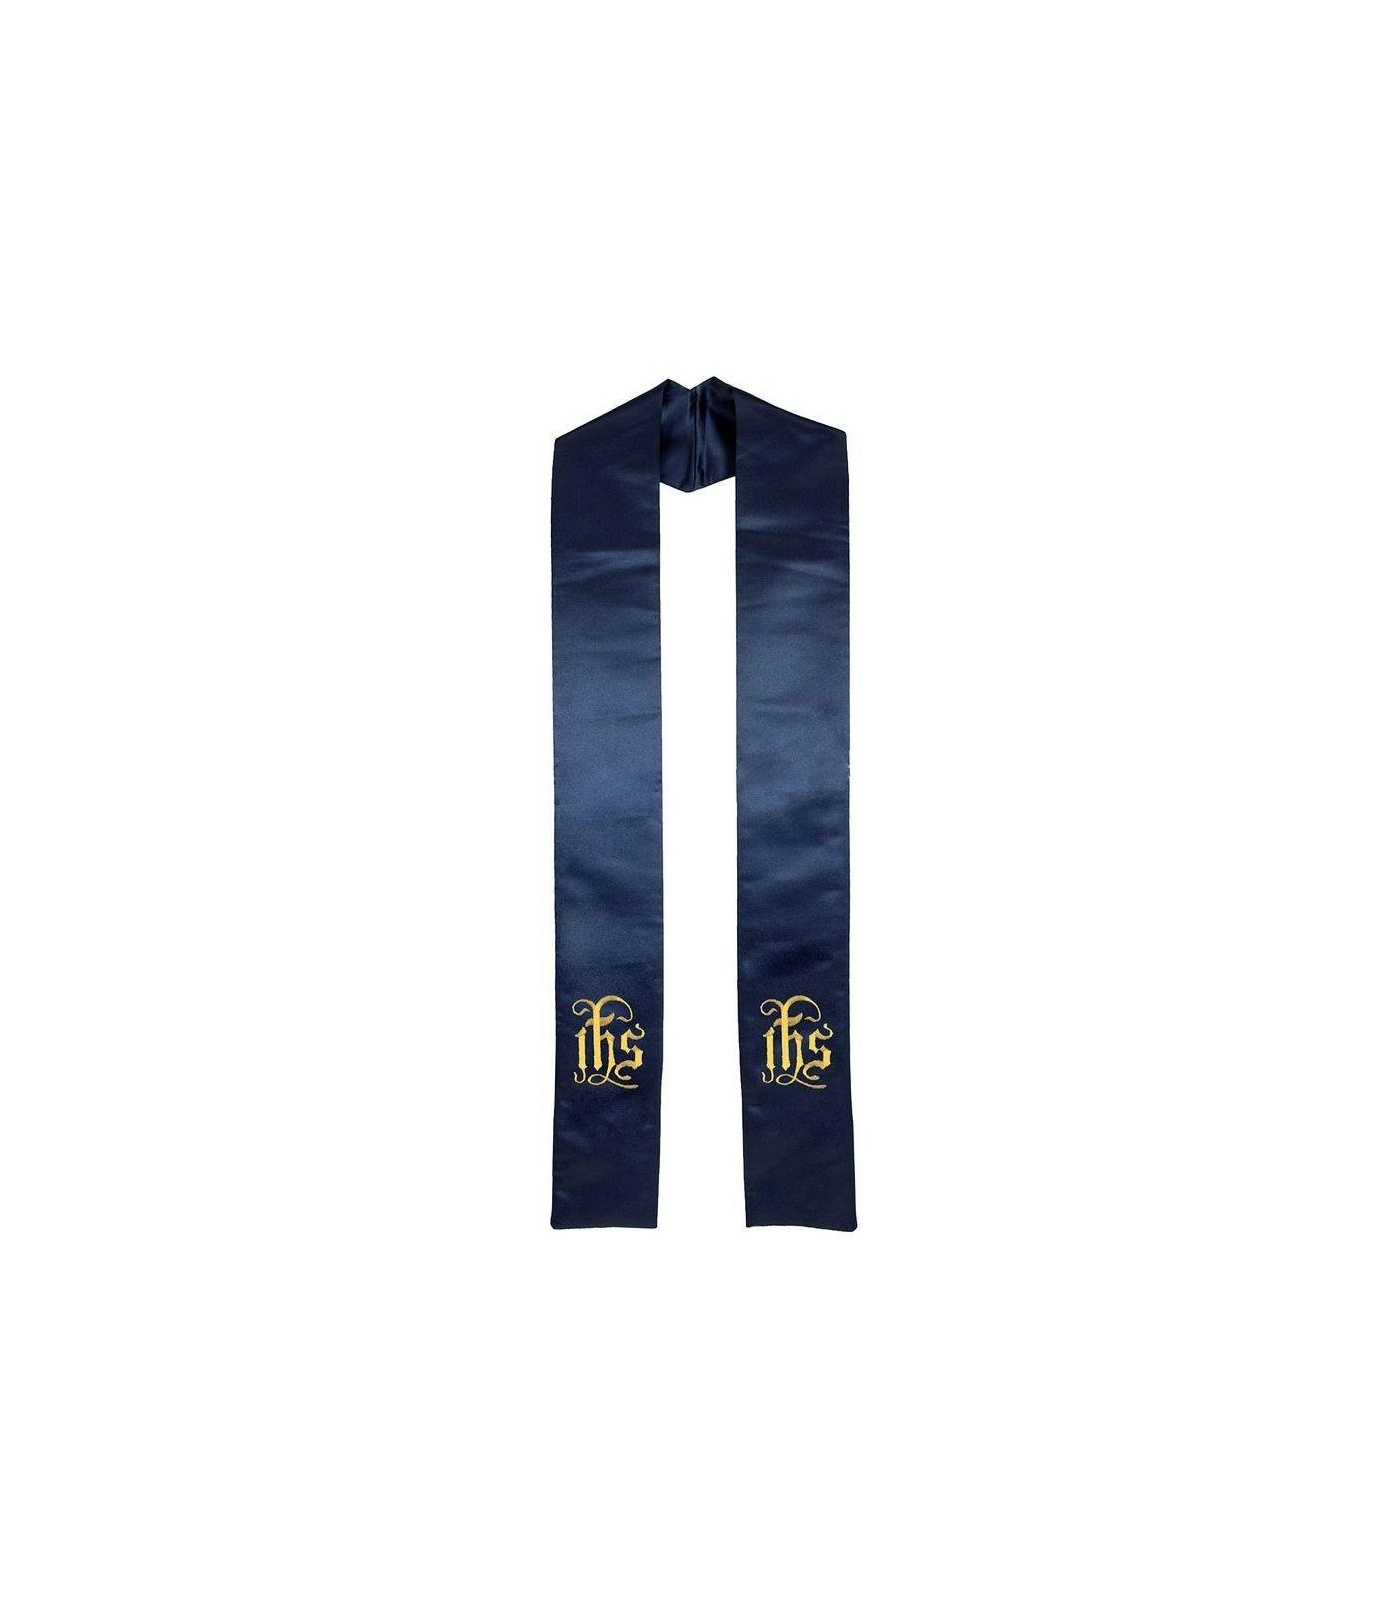 name_of_christ_symbol_-_in_his_service_-_navy_blue_1